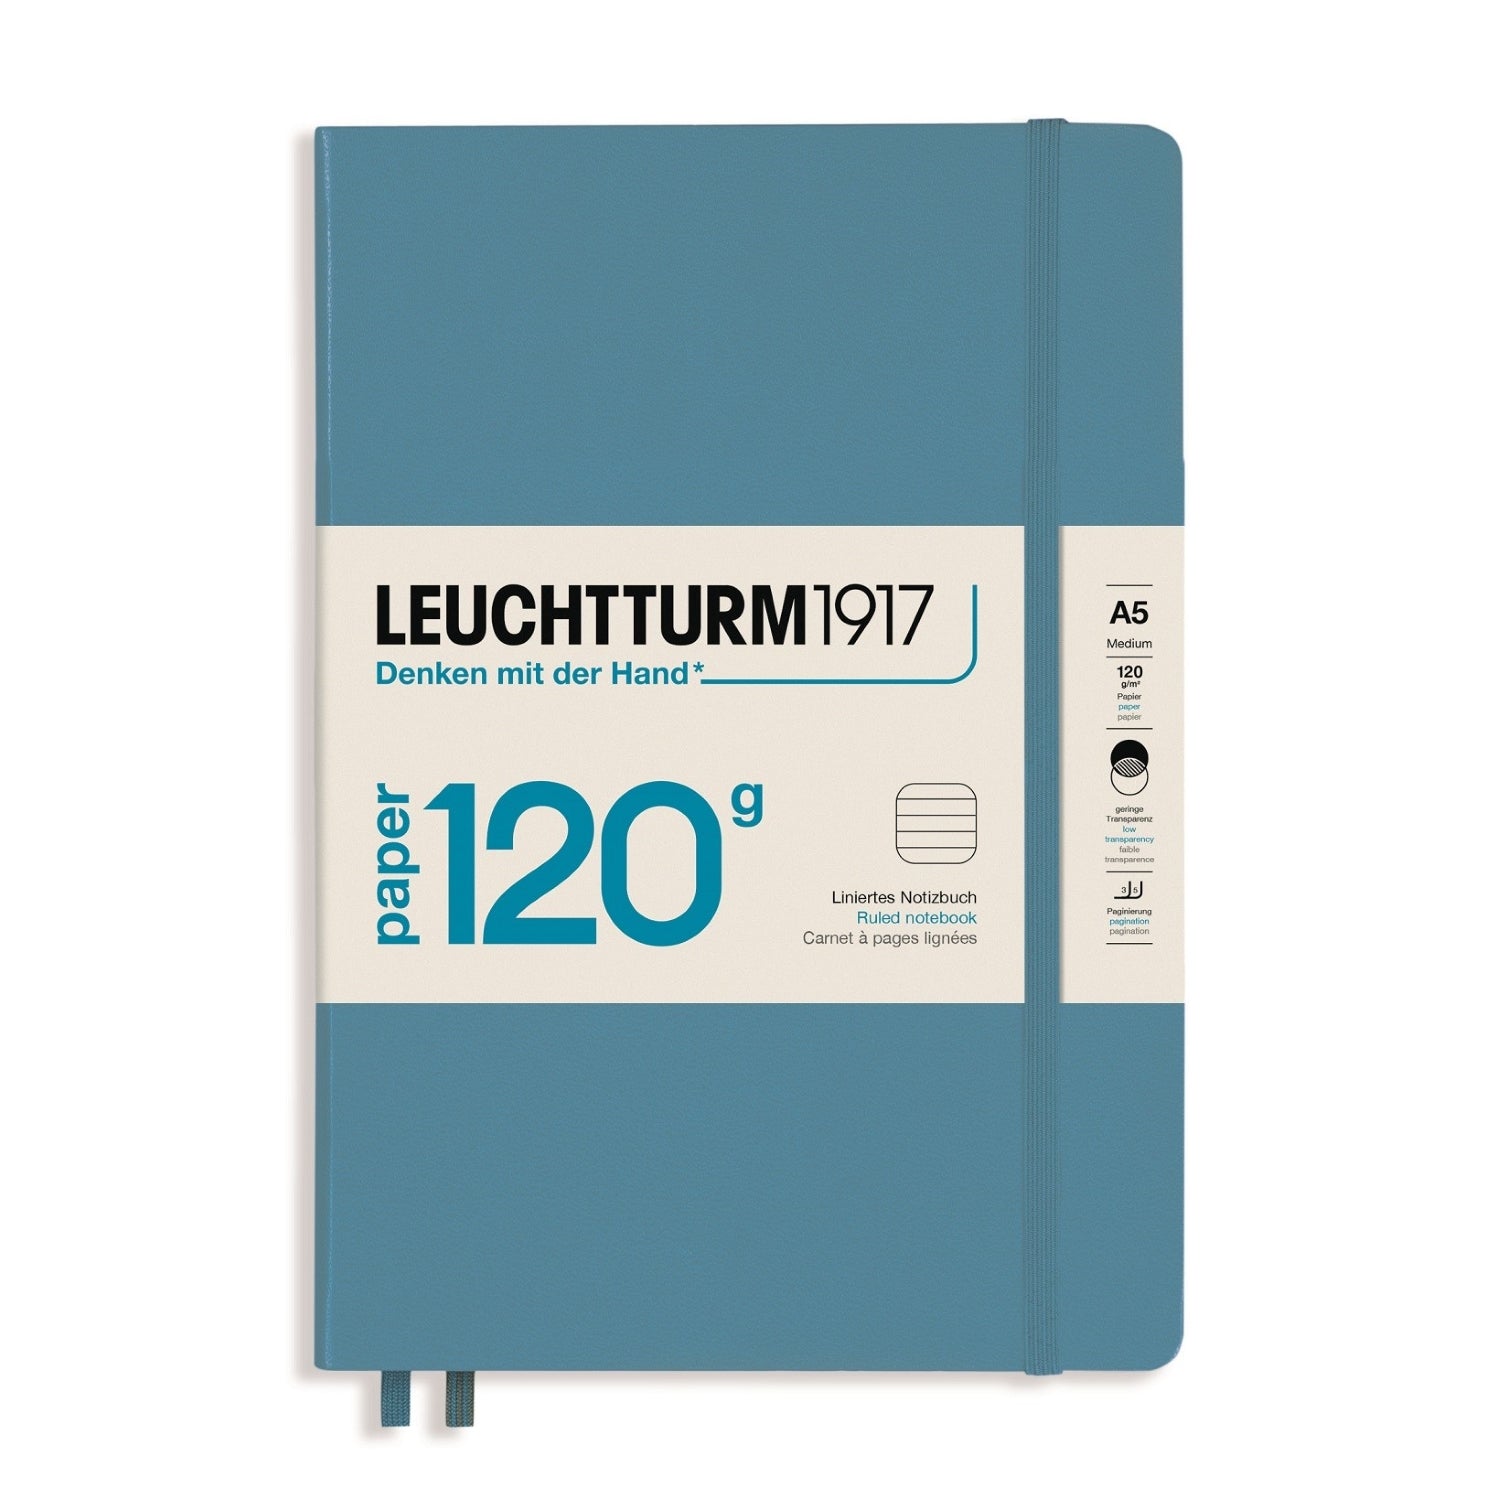 Leuchtturm 1917 Notebook Hard Cover A5 Lined - Nordic Blue - 120g Edition